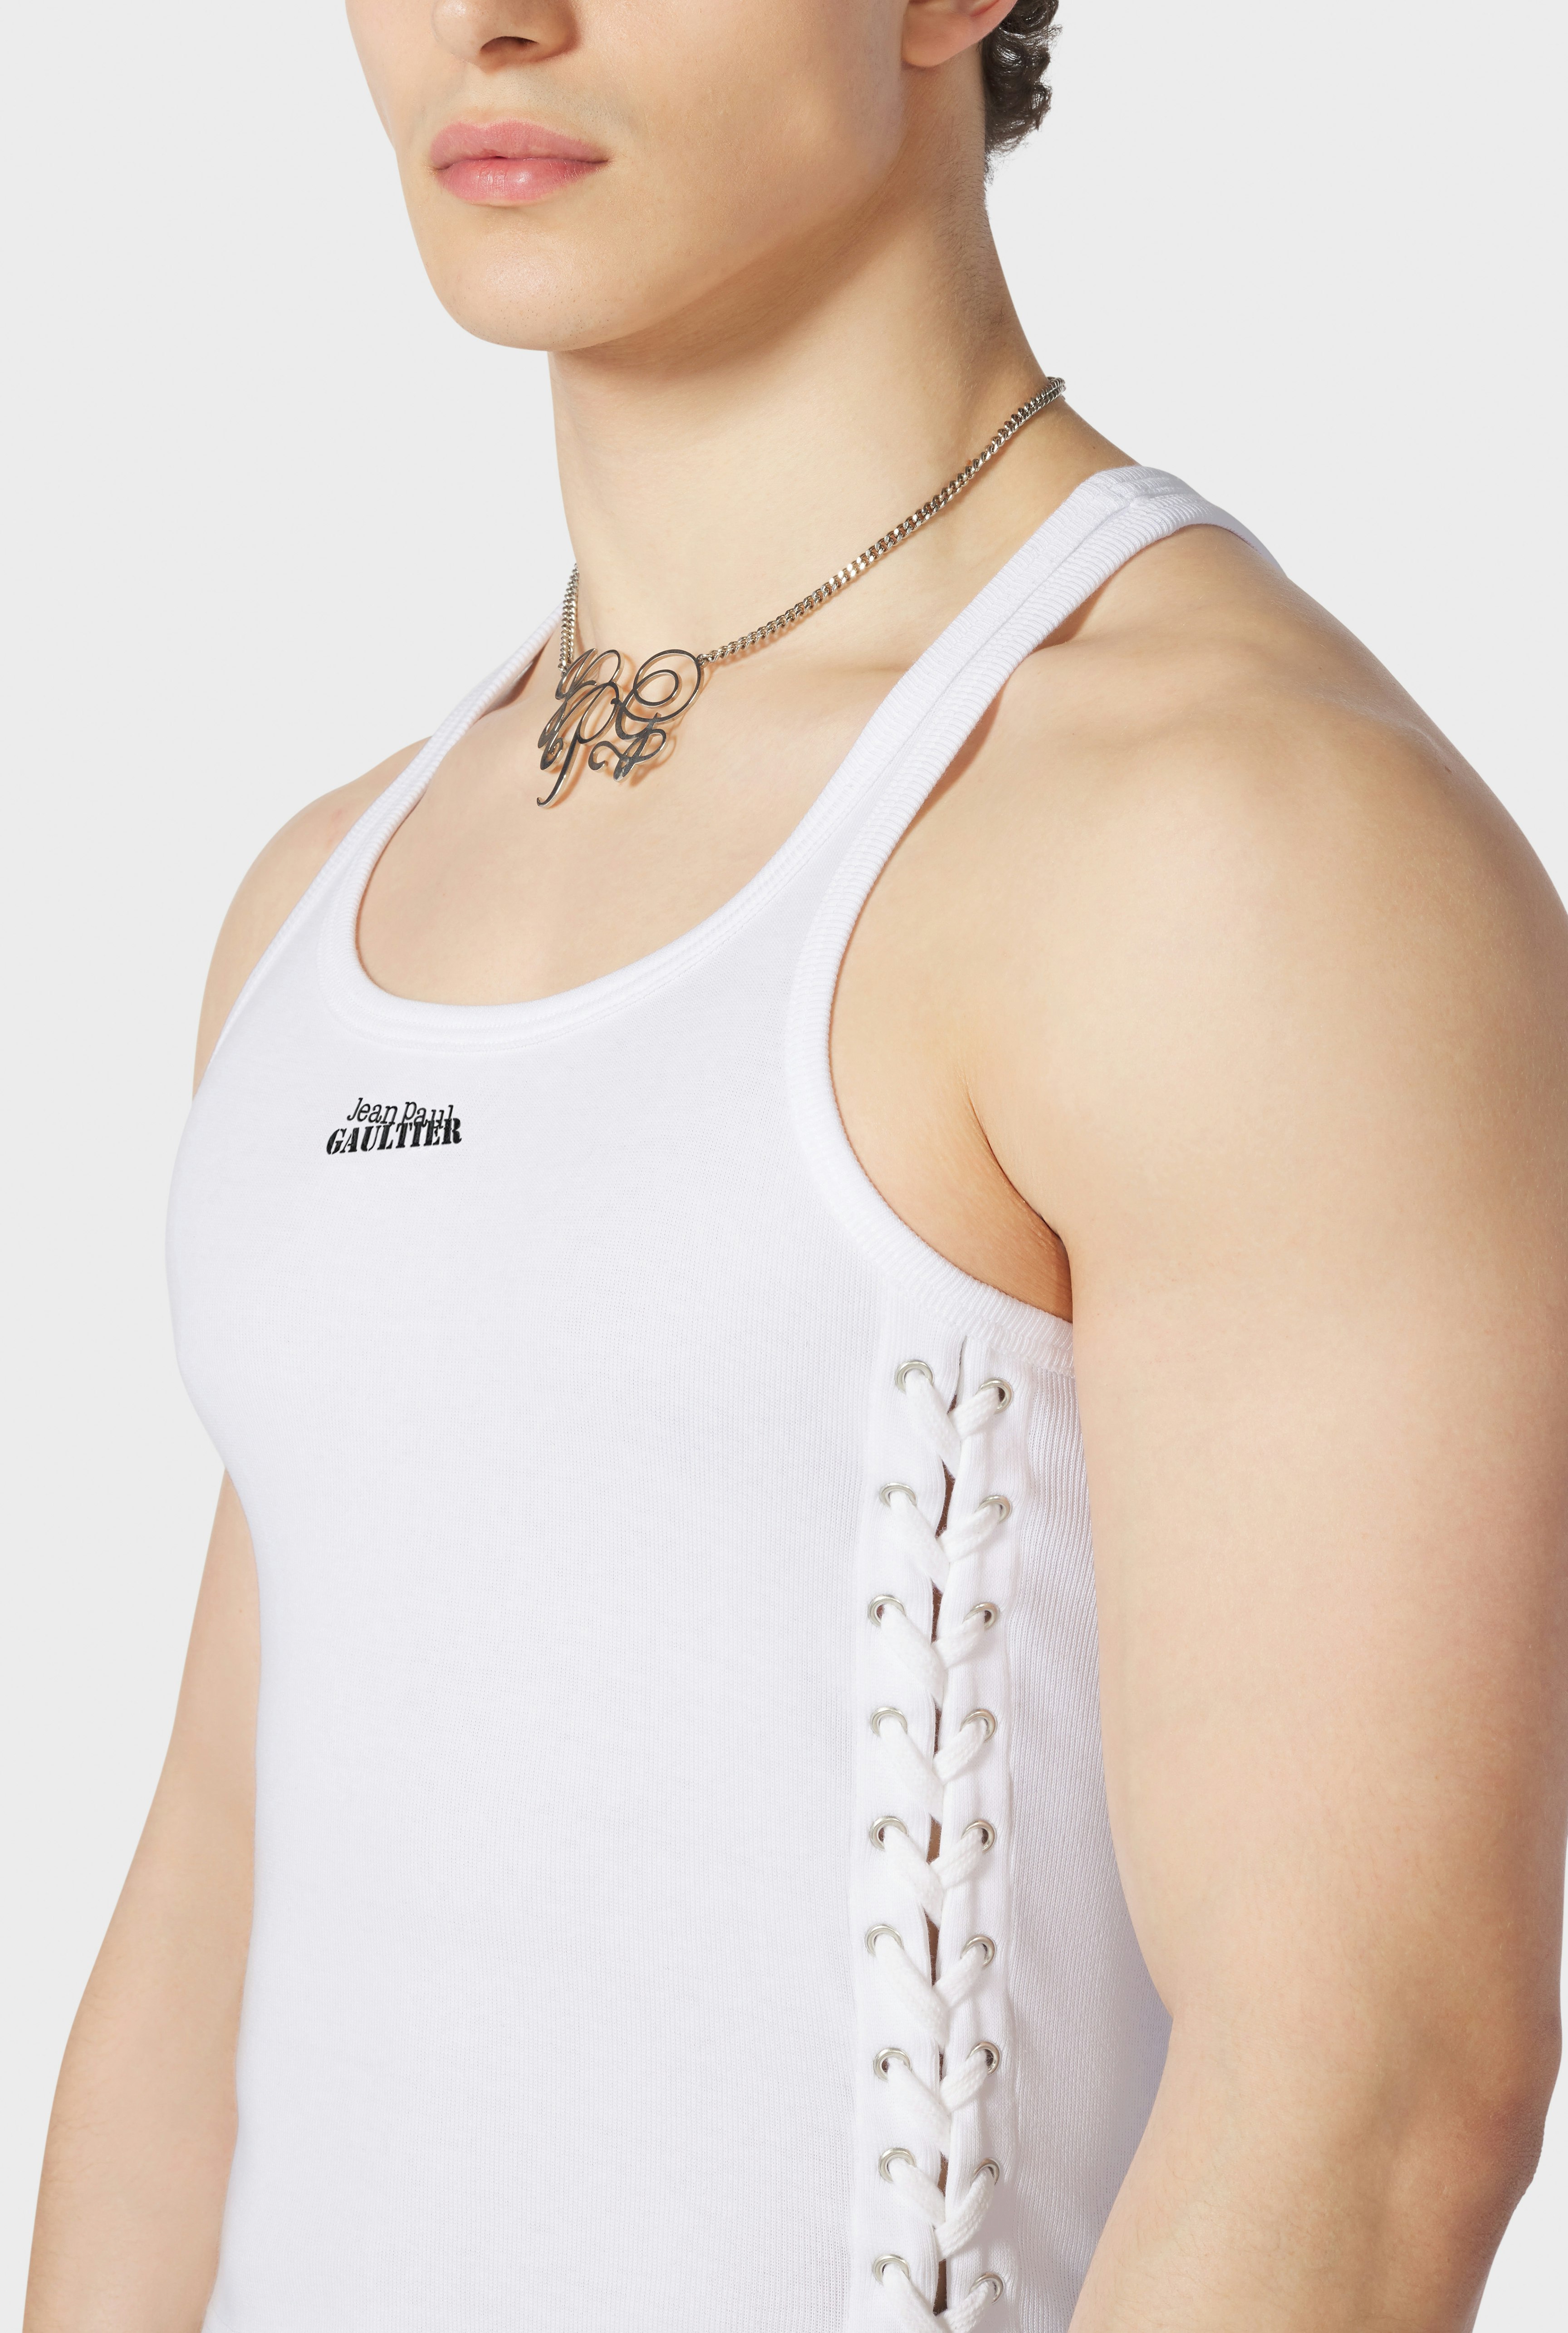 The White Lace-Up JPG Tank Top